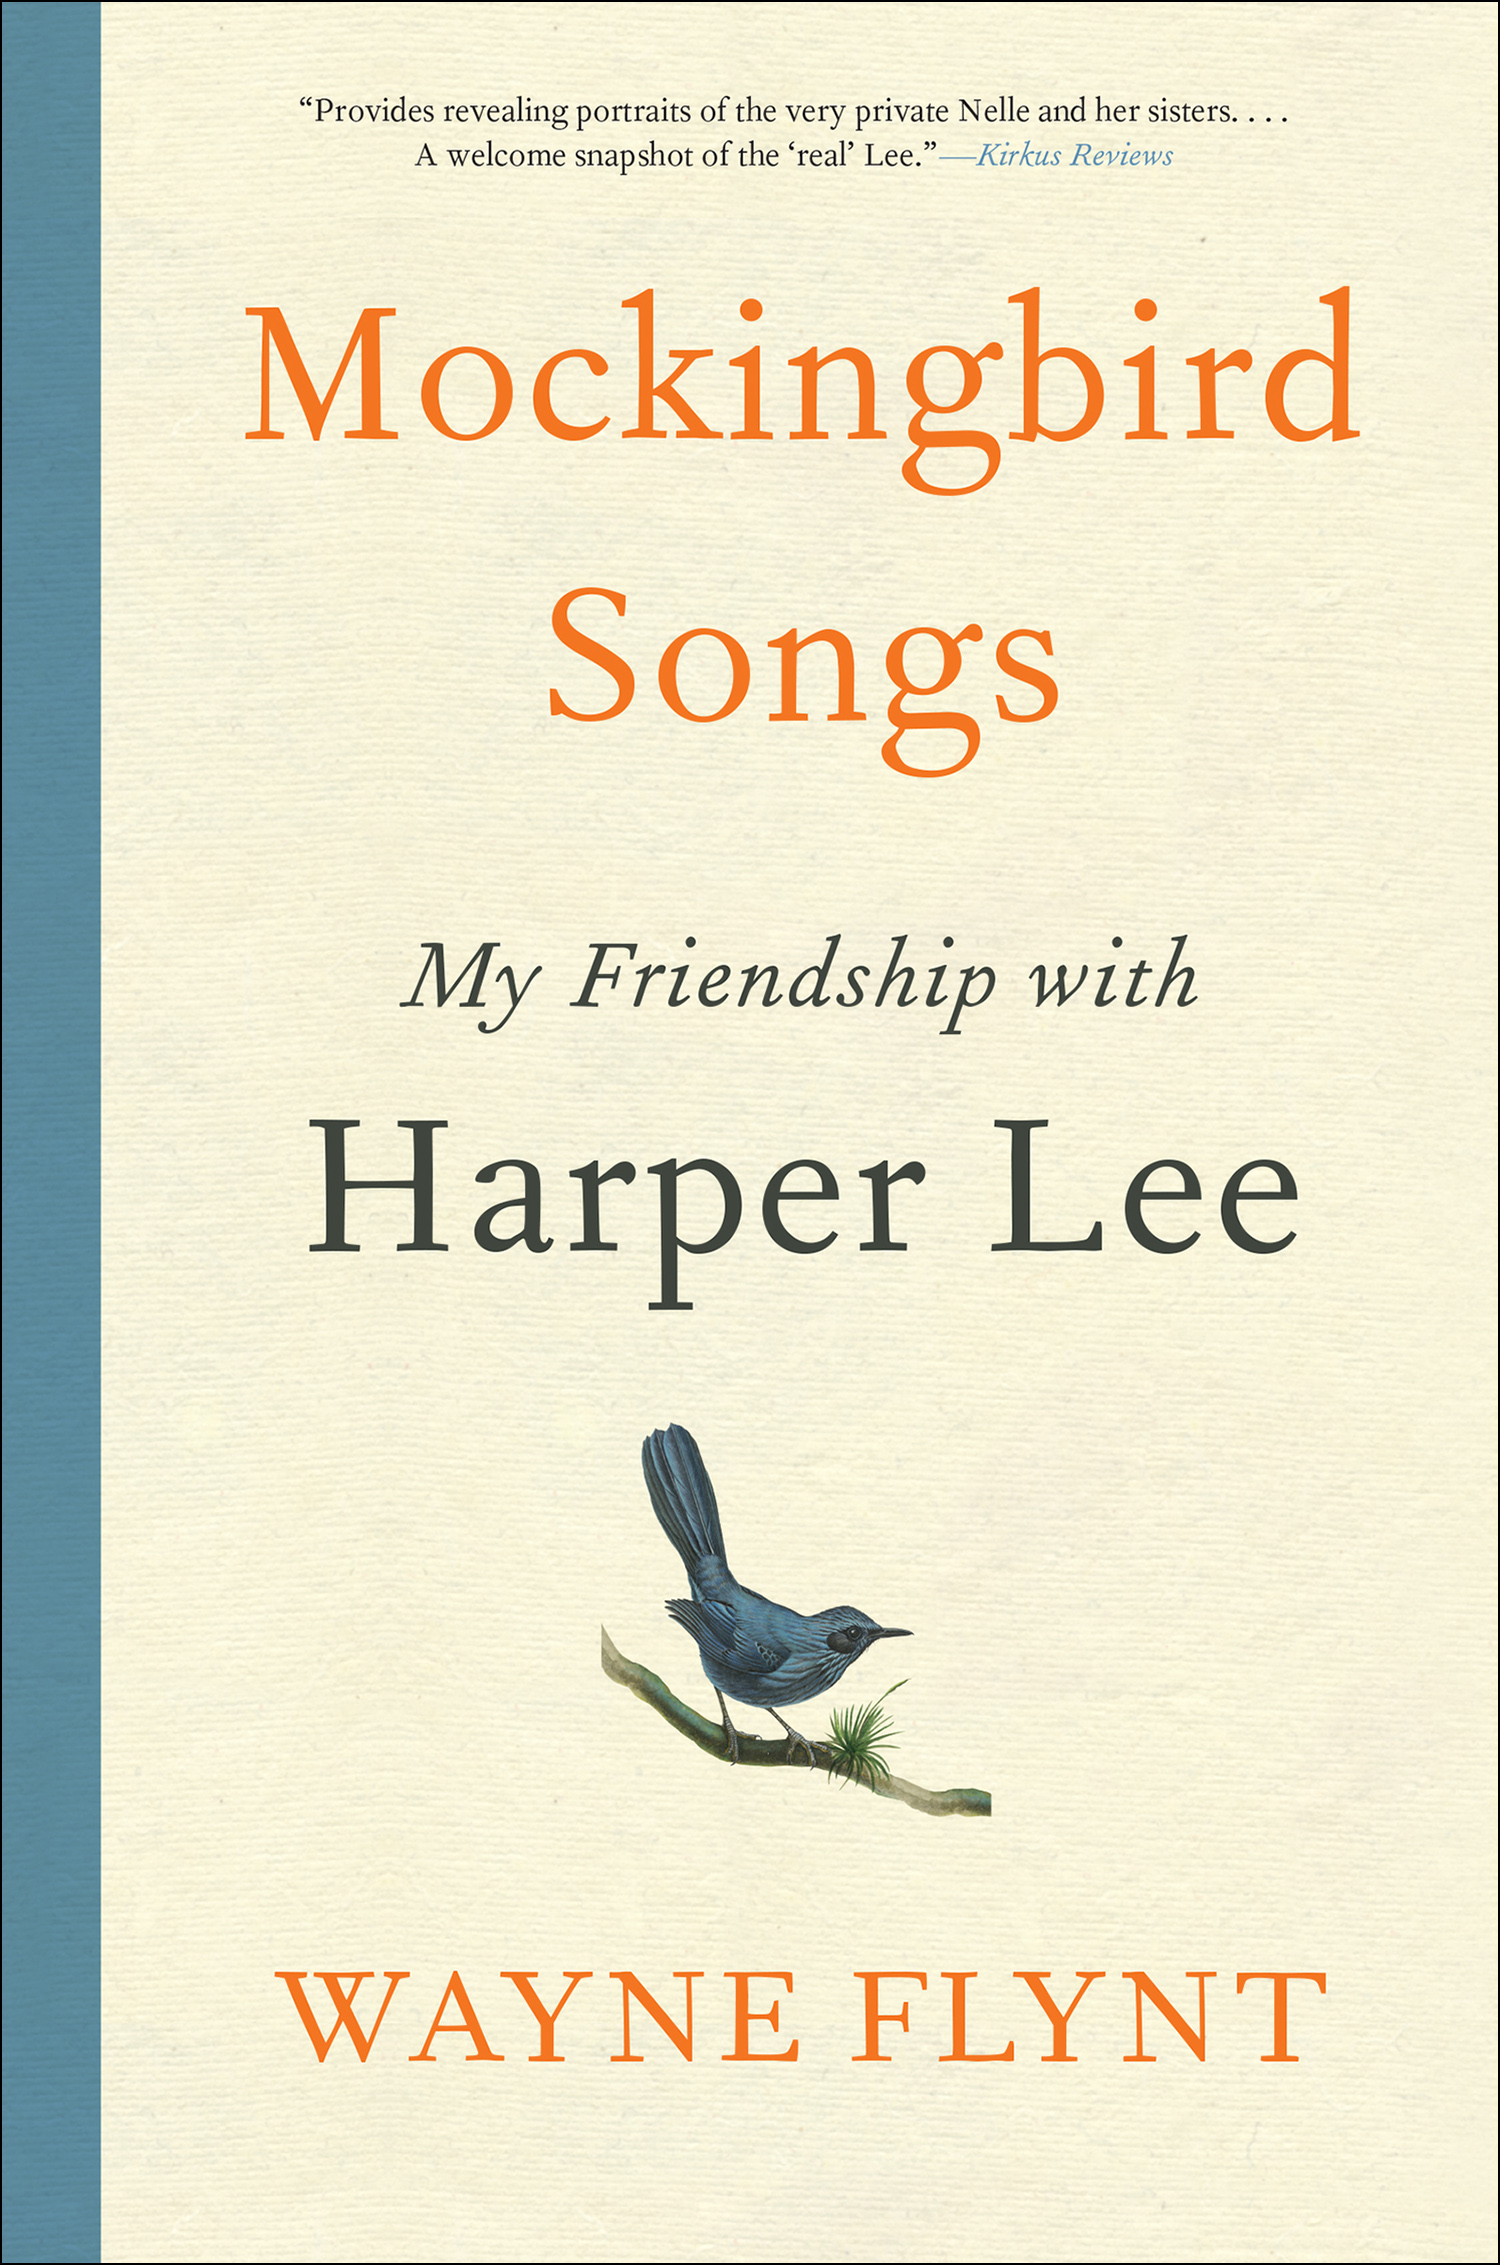 Mockingbird songs my friendship with Harper Lee cover image